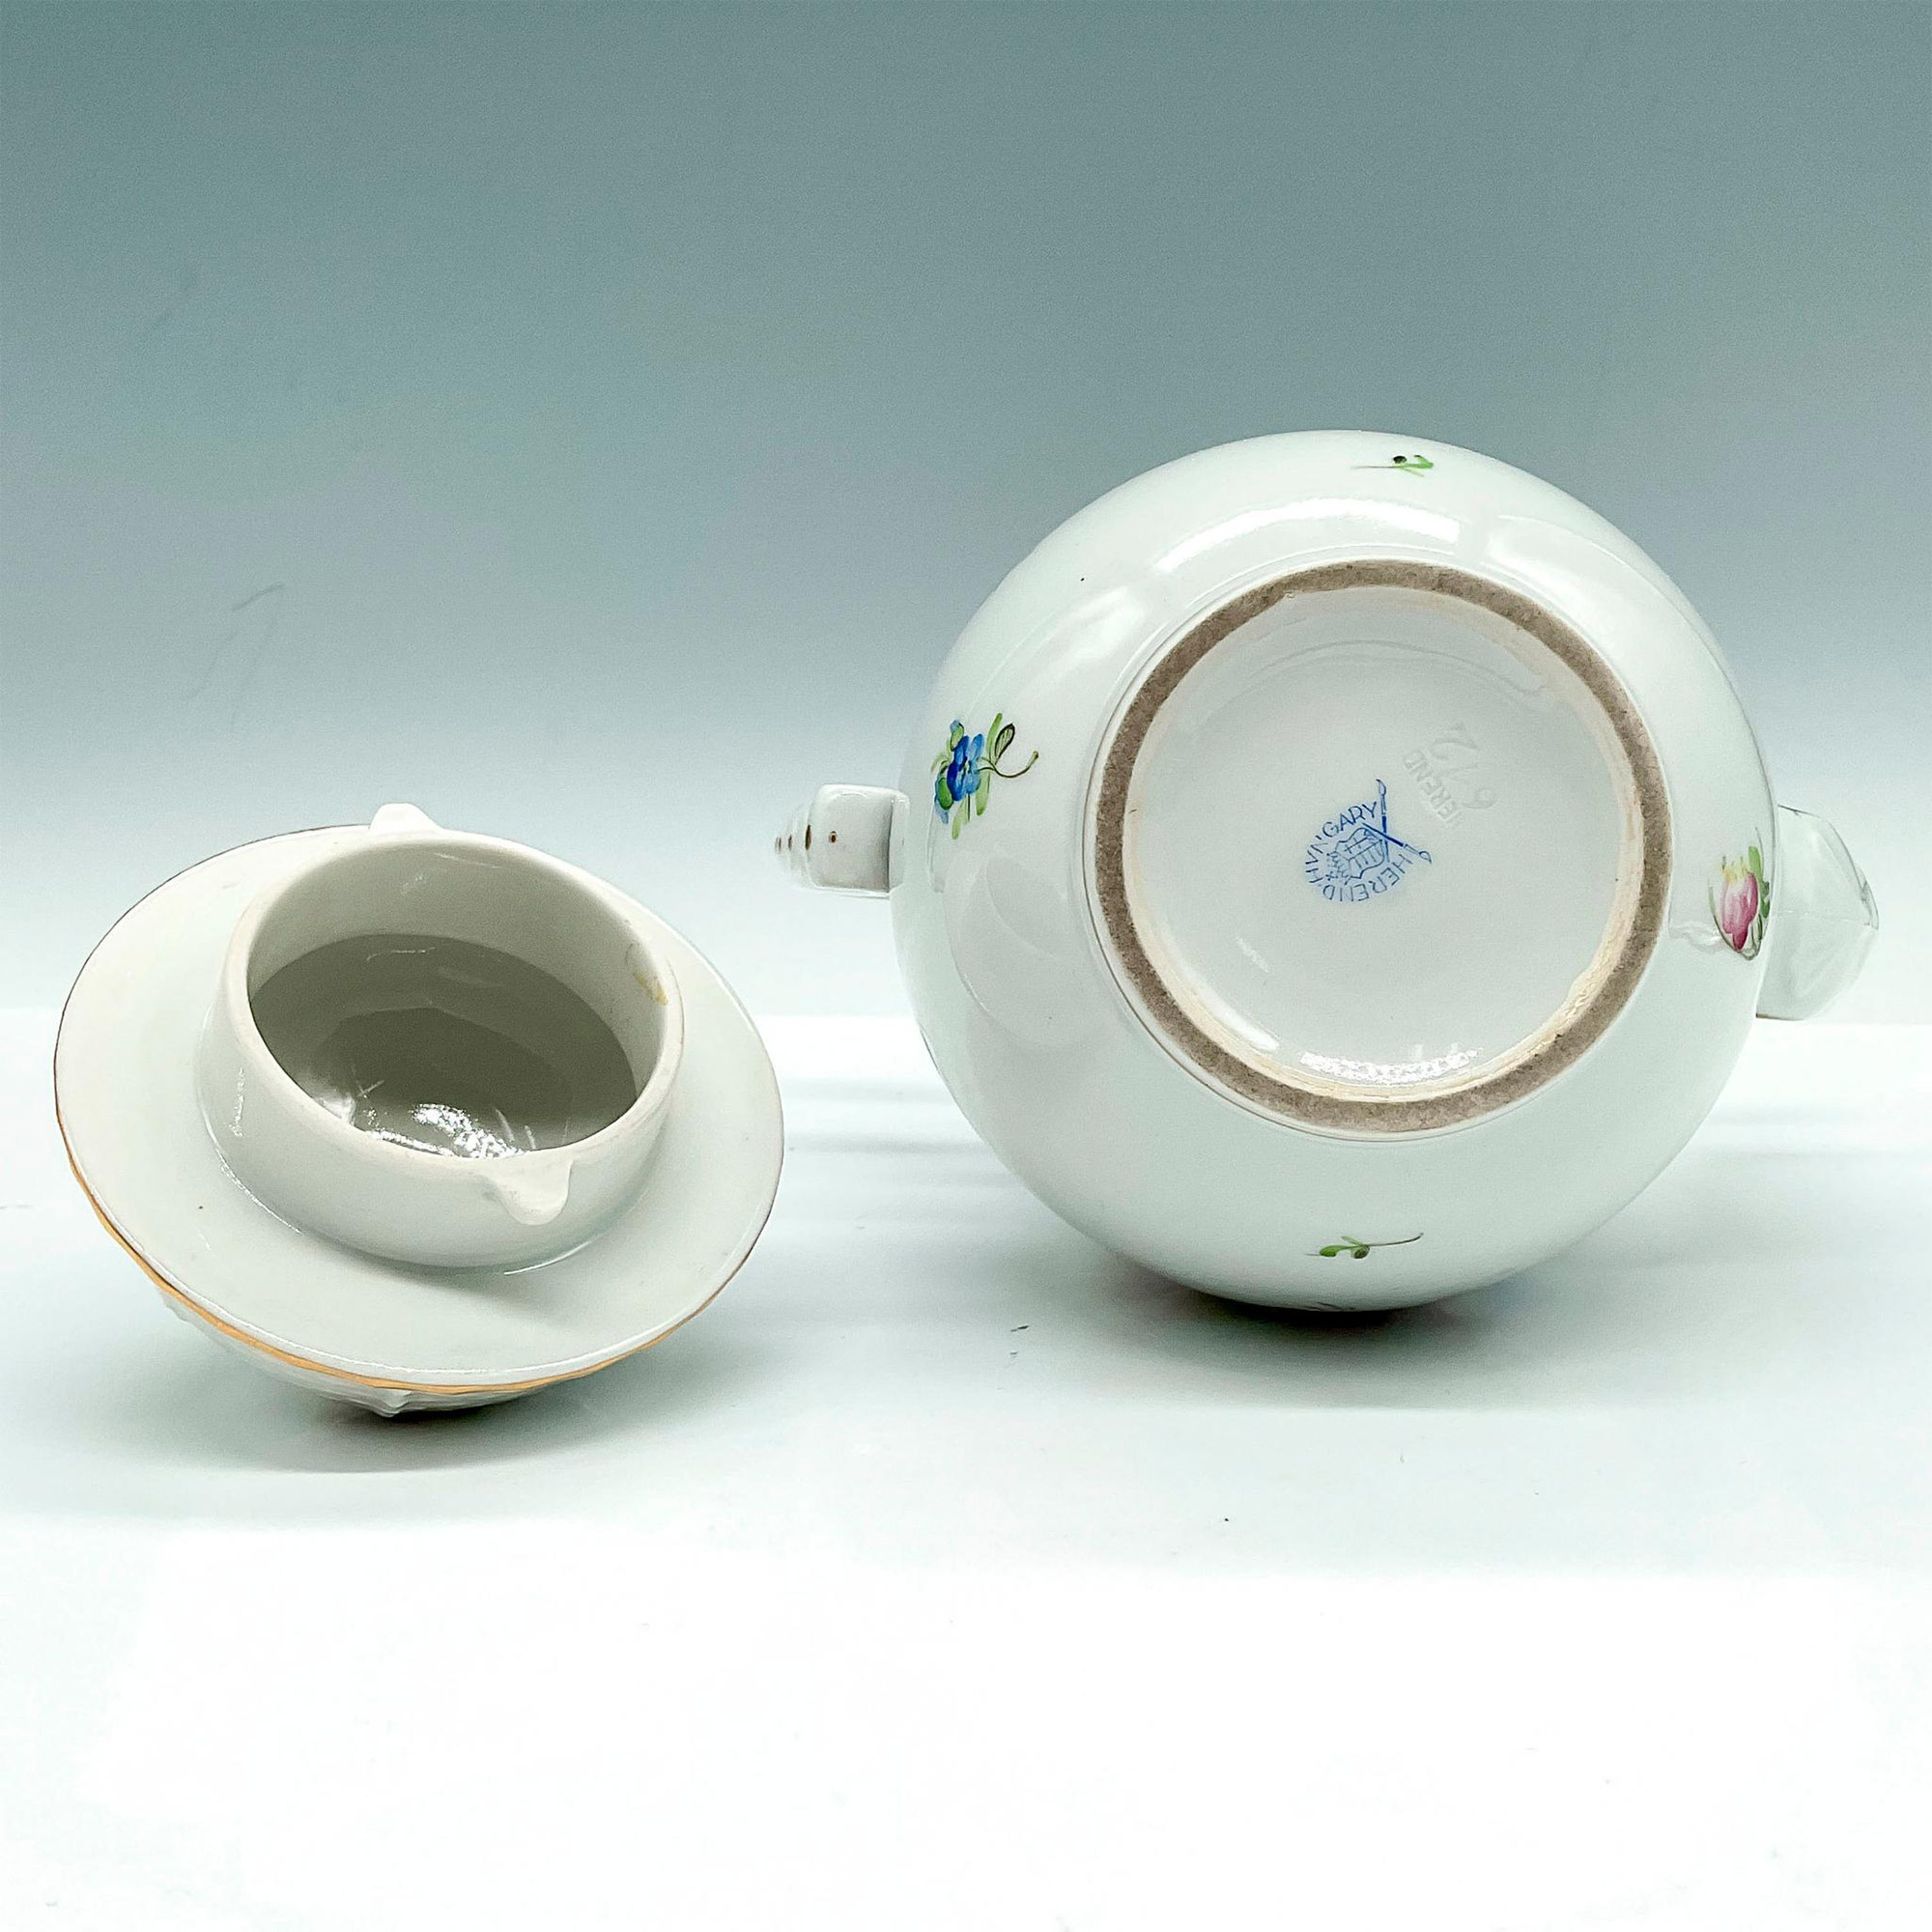 Herend Porcelain Coffee Pot - Image 3 of 3